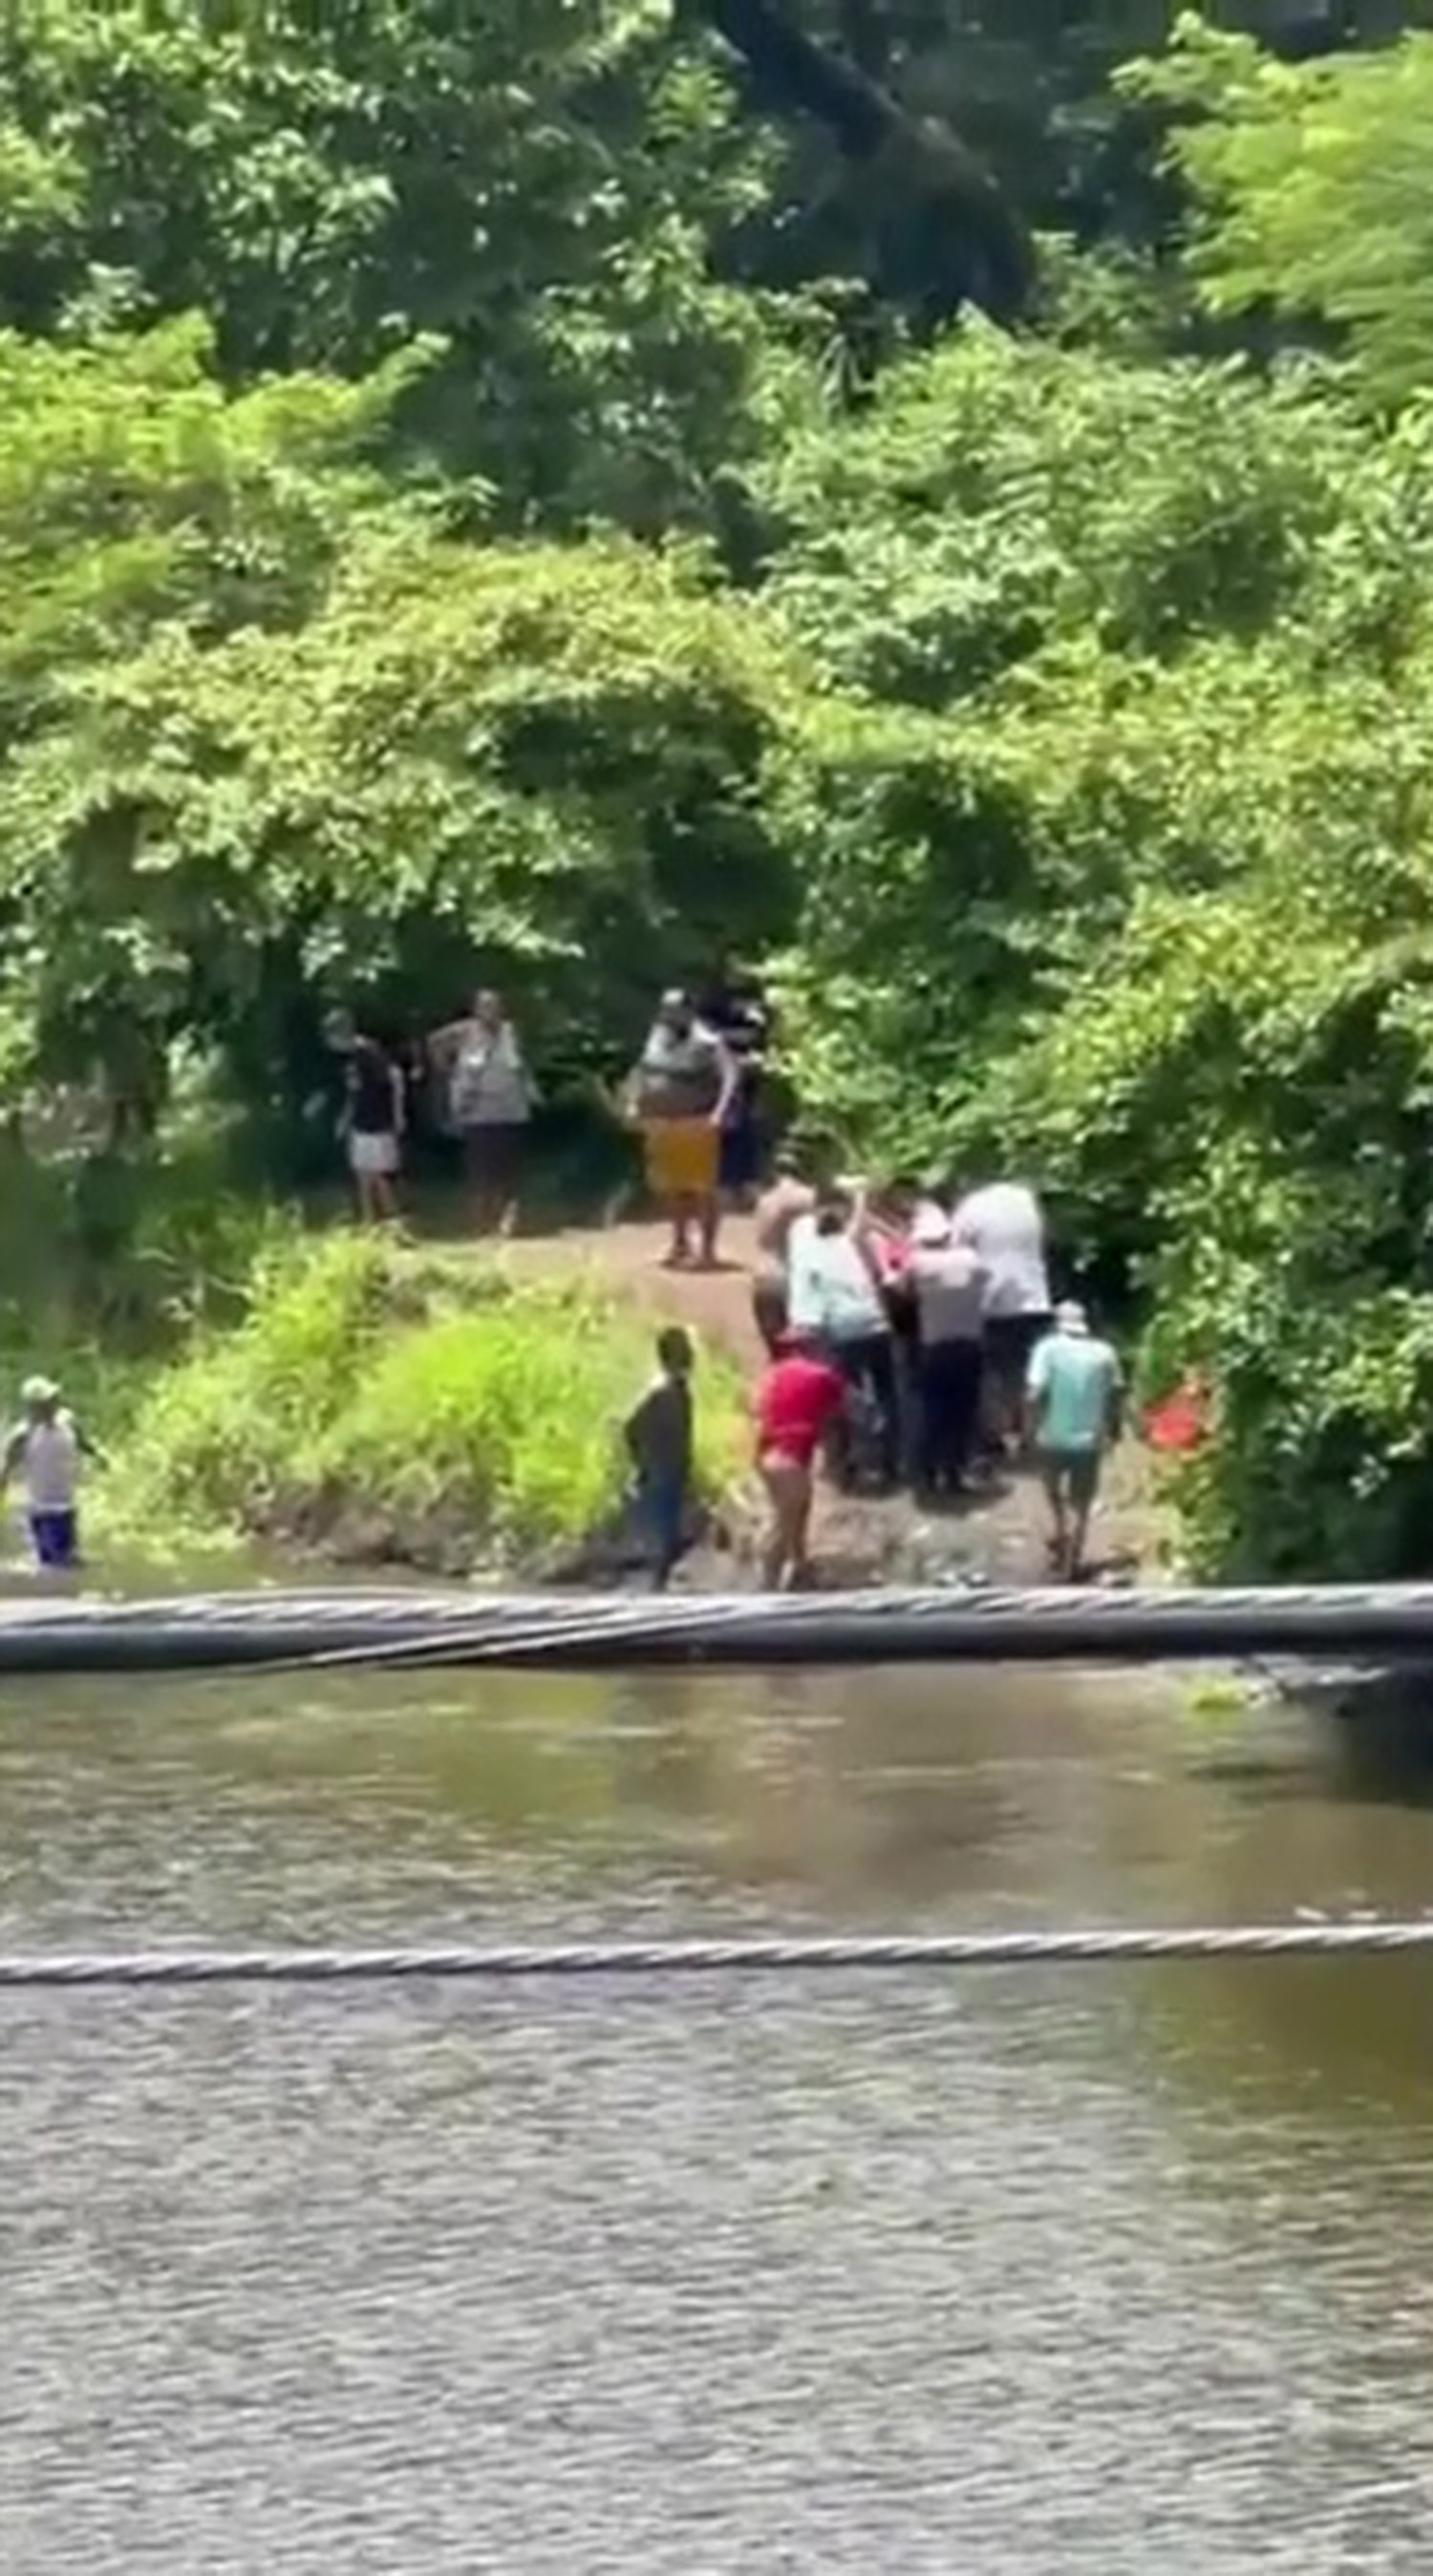 Soccer player dies from killer croc encounter while trying to cool off in river